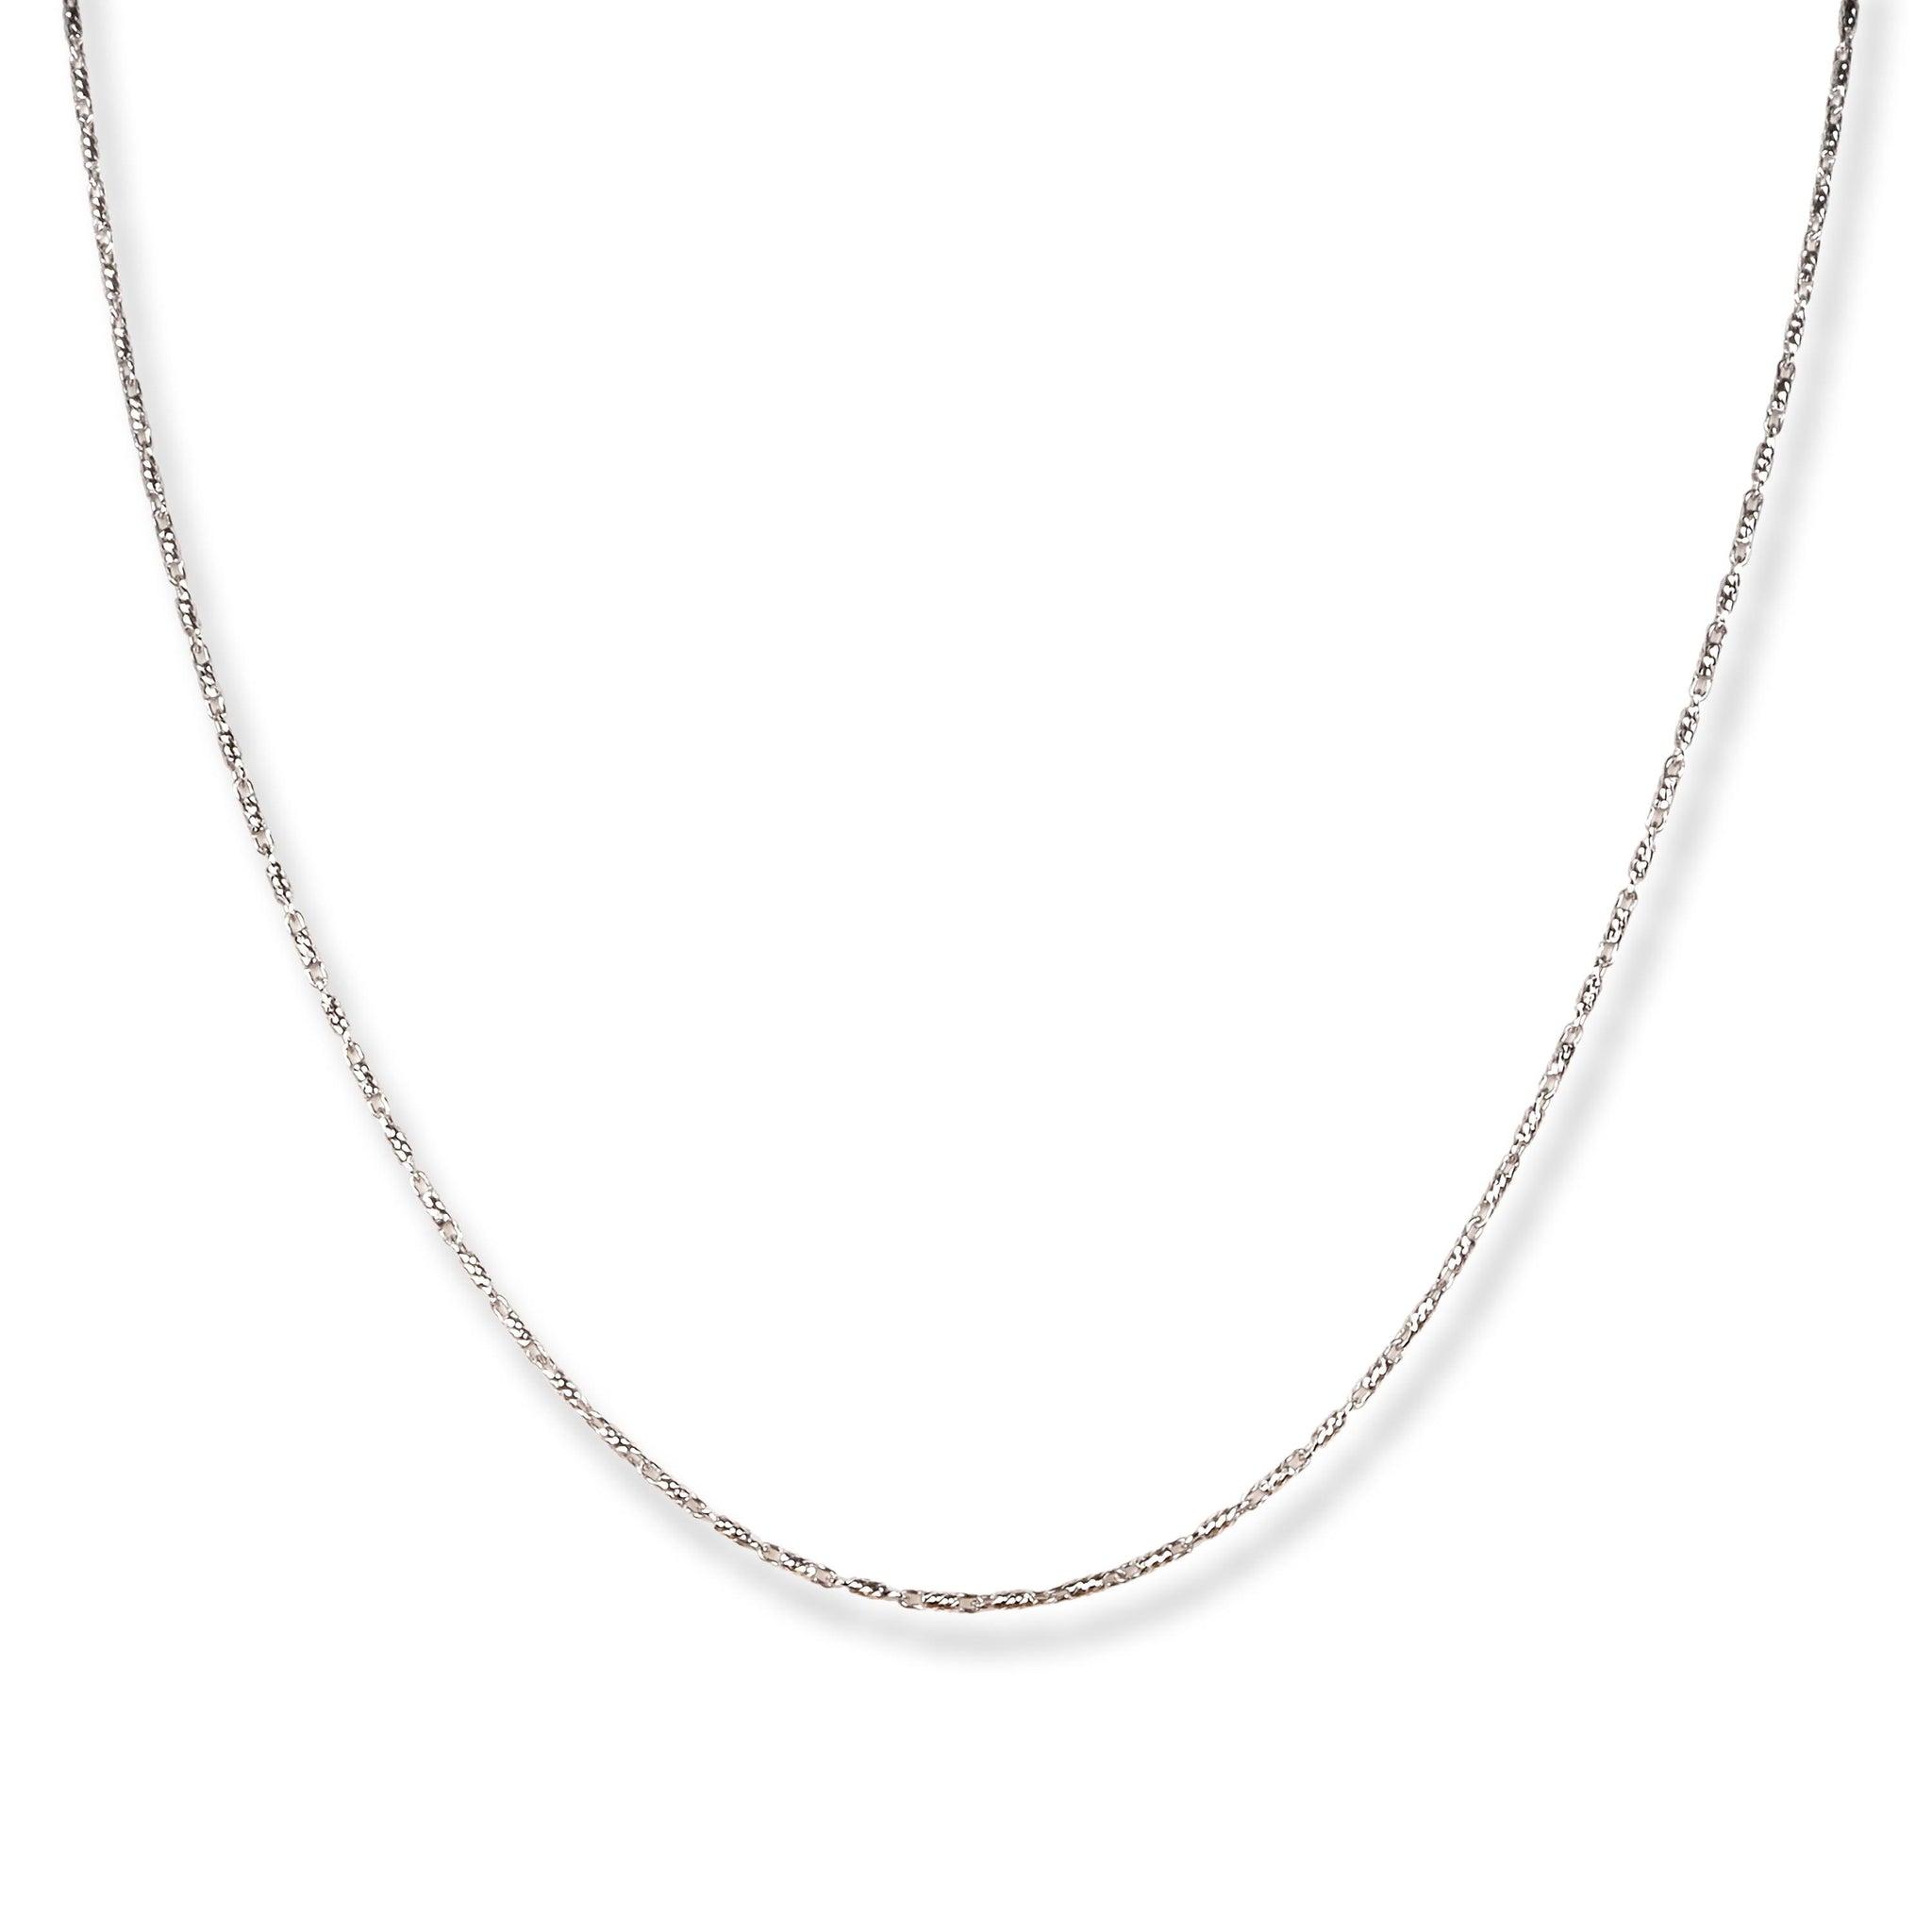 18ct White Gold Chain with Lobster Clasp C-3808